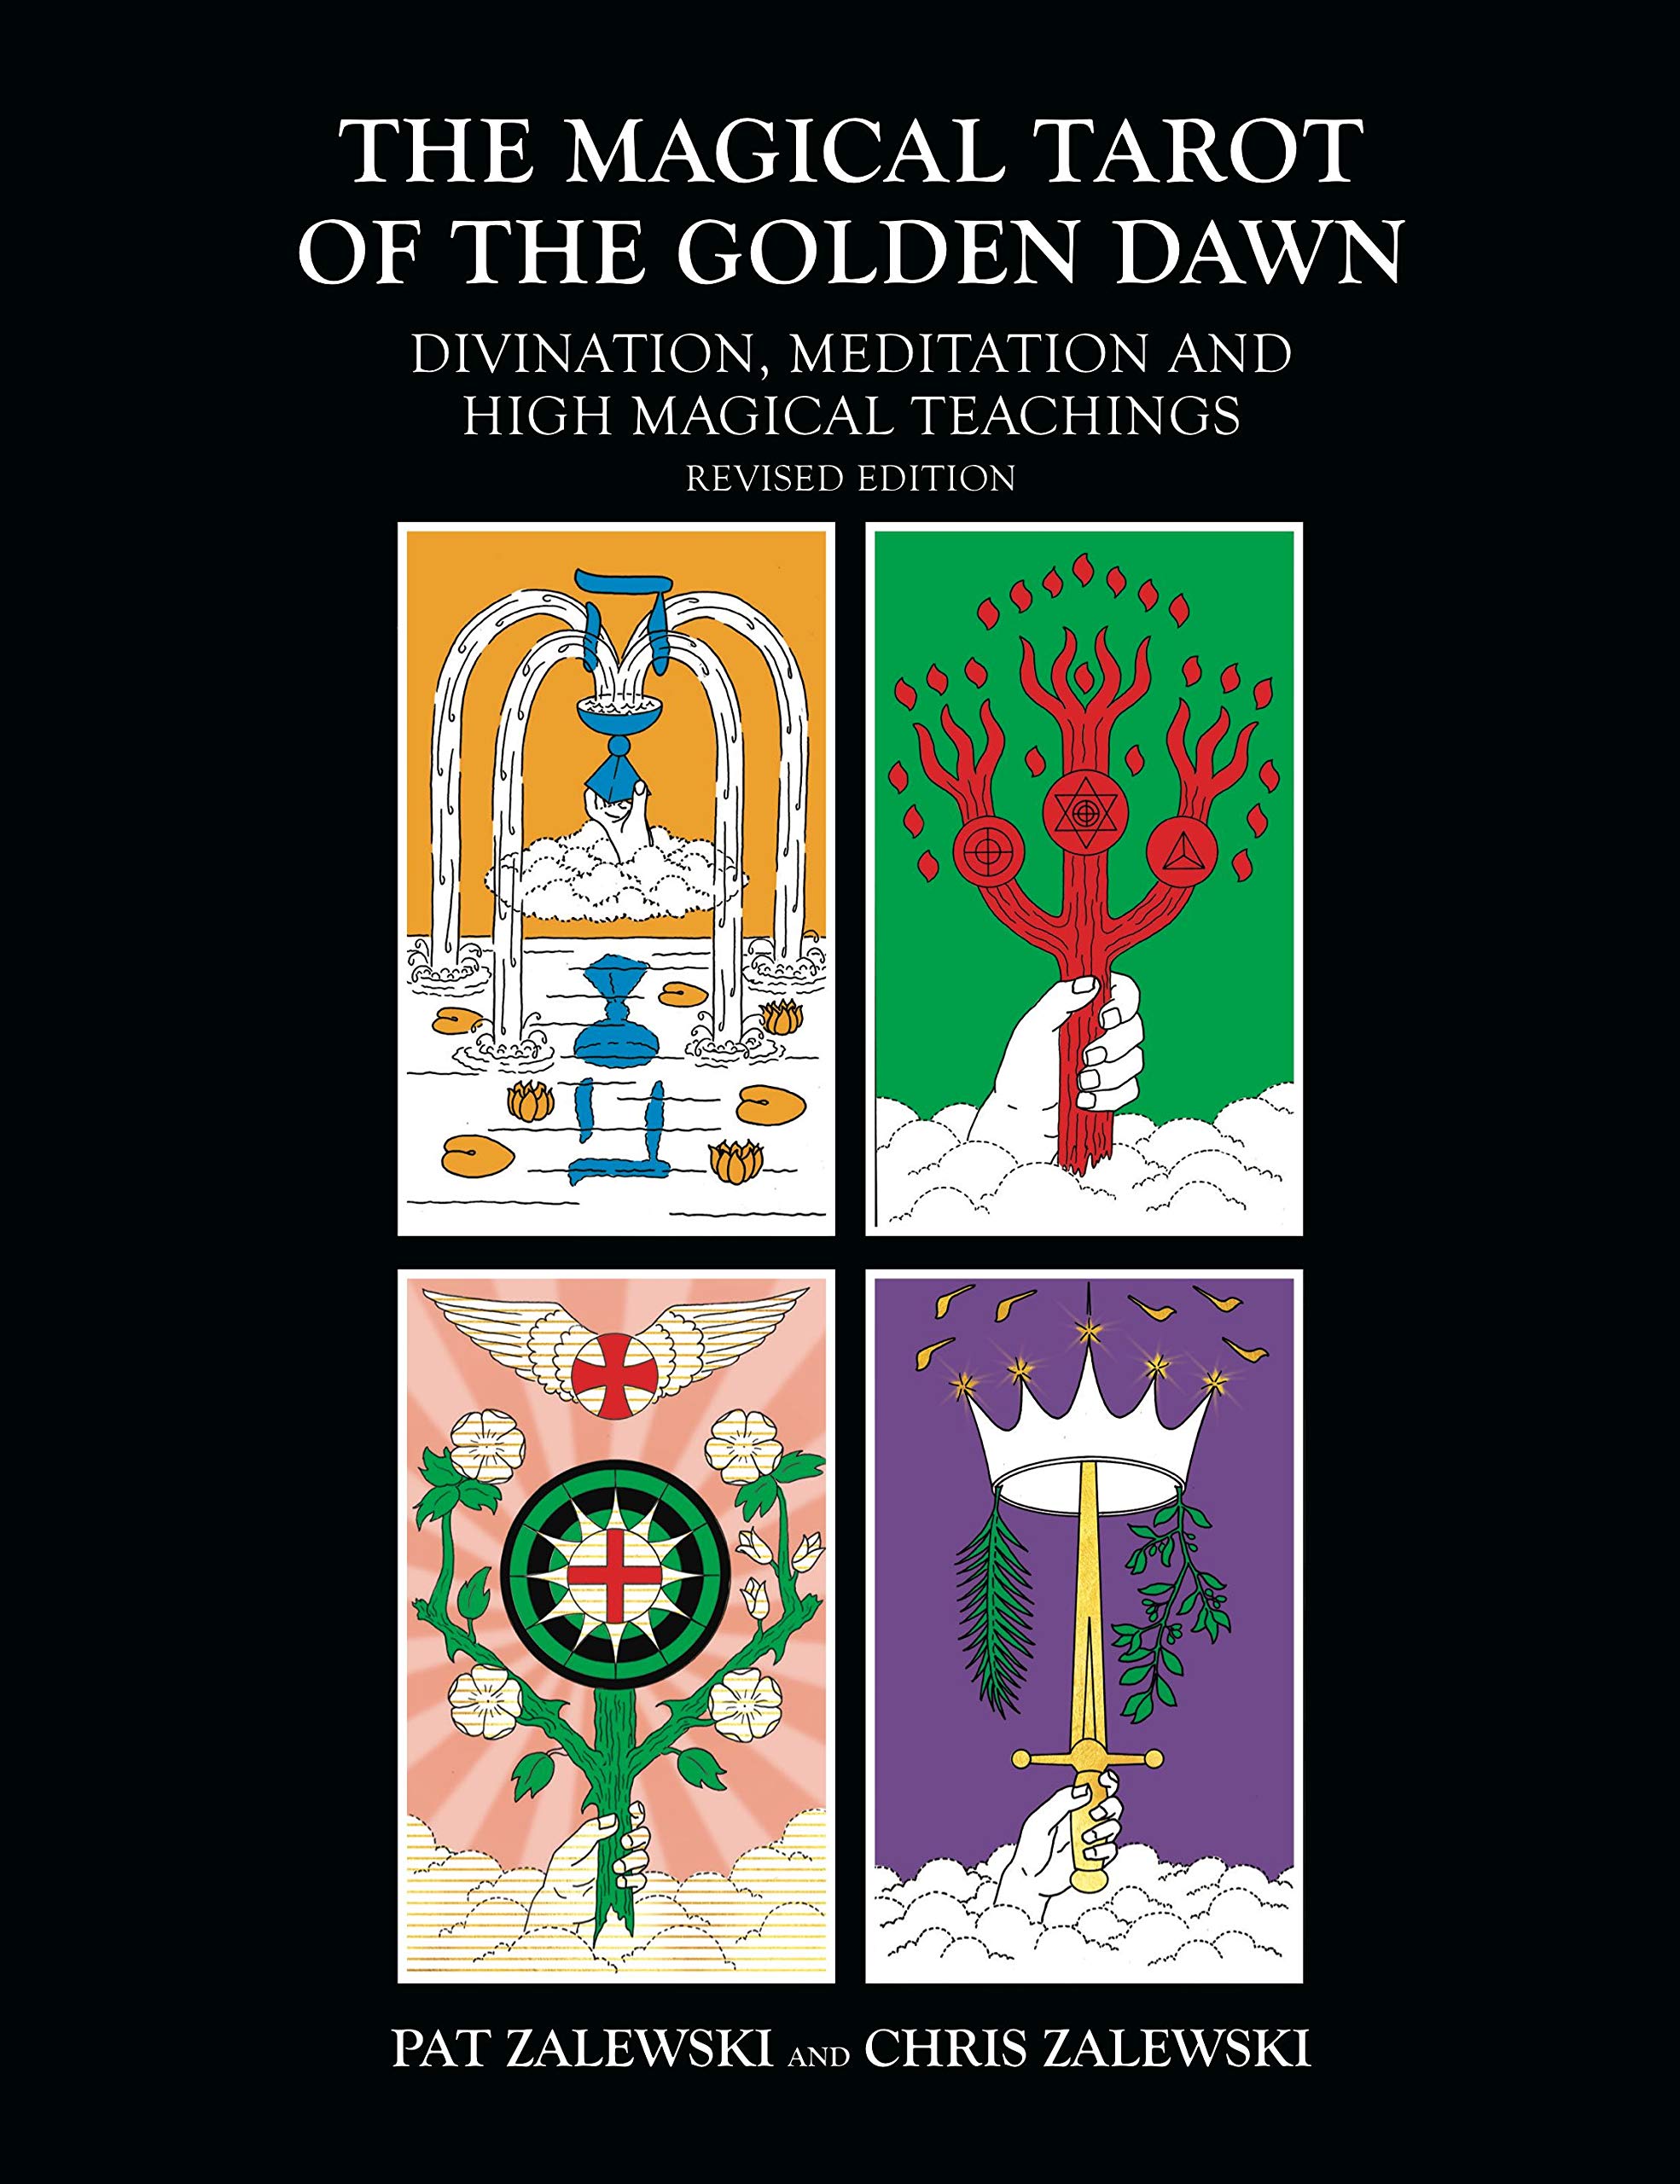 The Magical Tarot of the Golden Dawn: Divination, Meditation and High Magical Teachings - Revised Edition